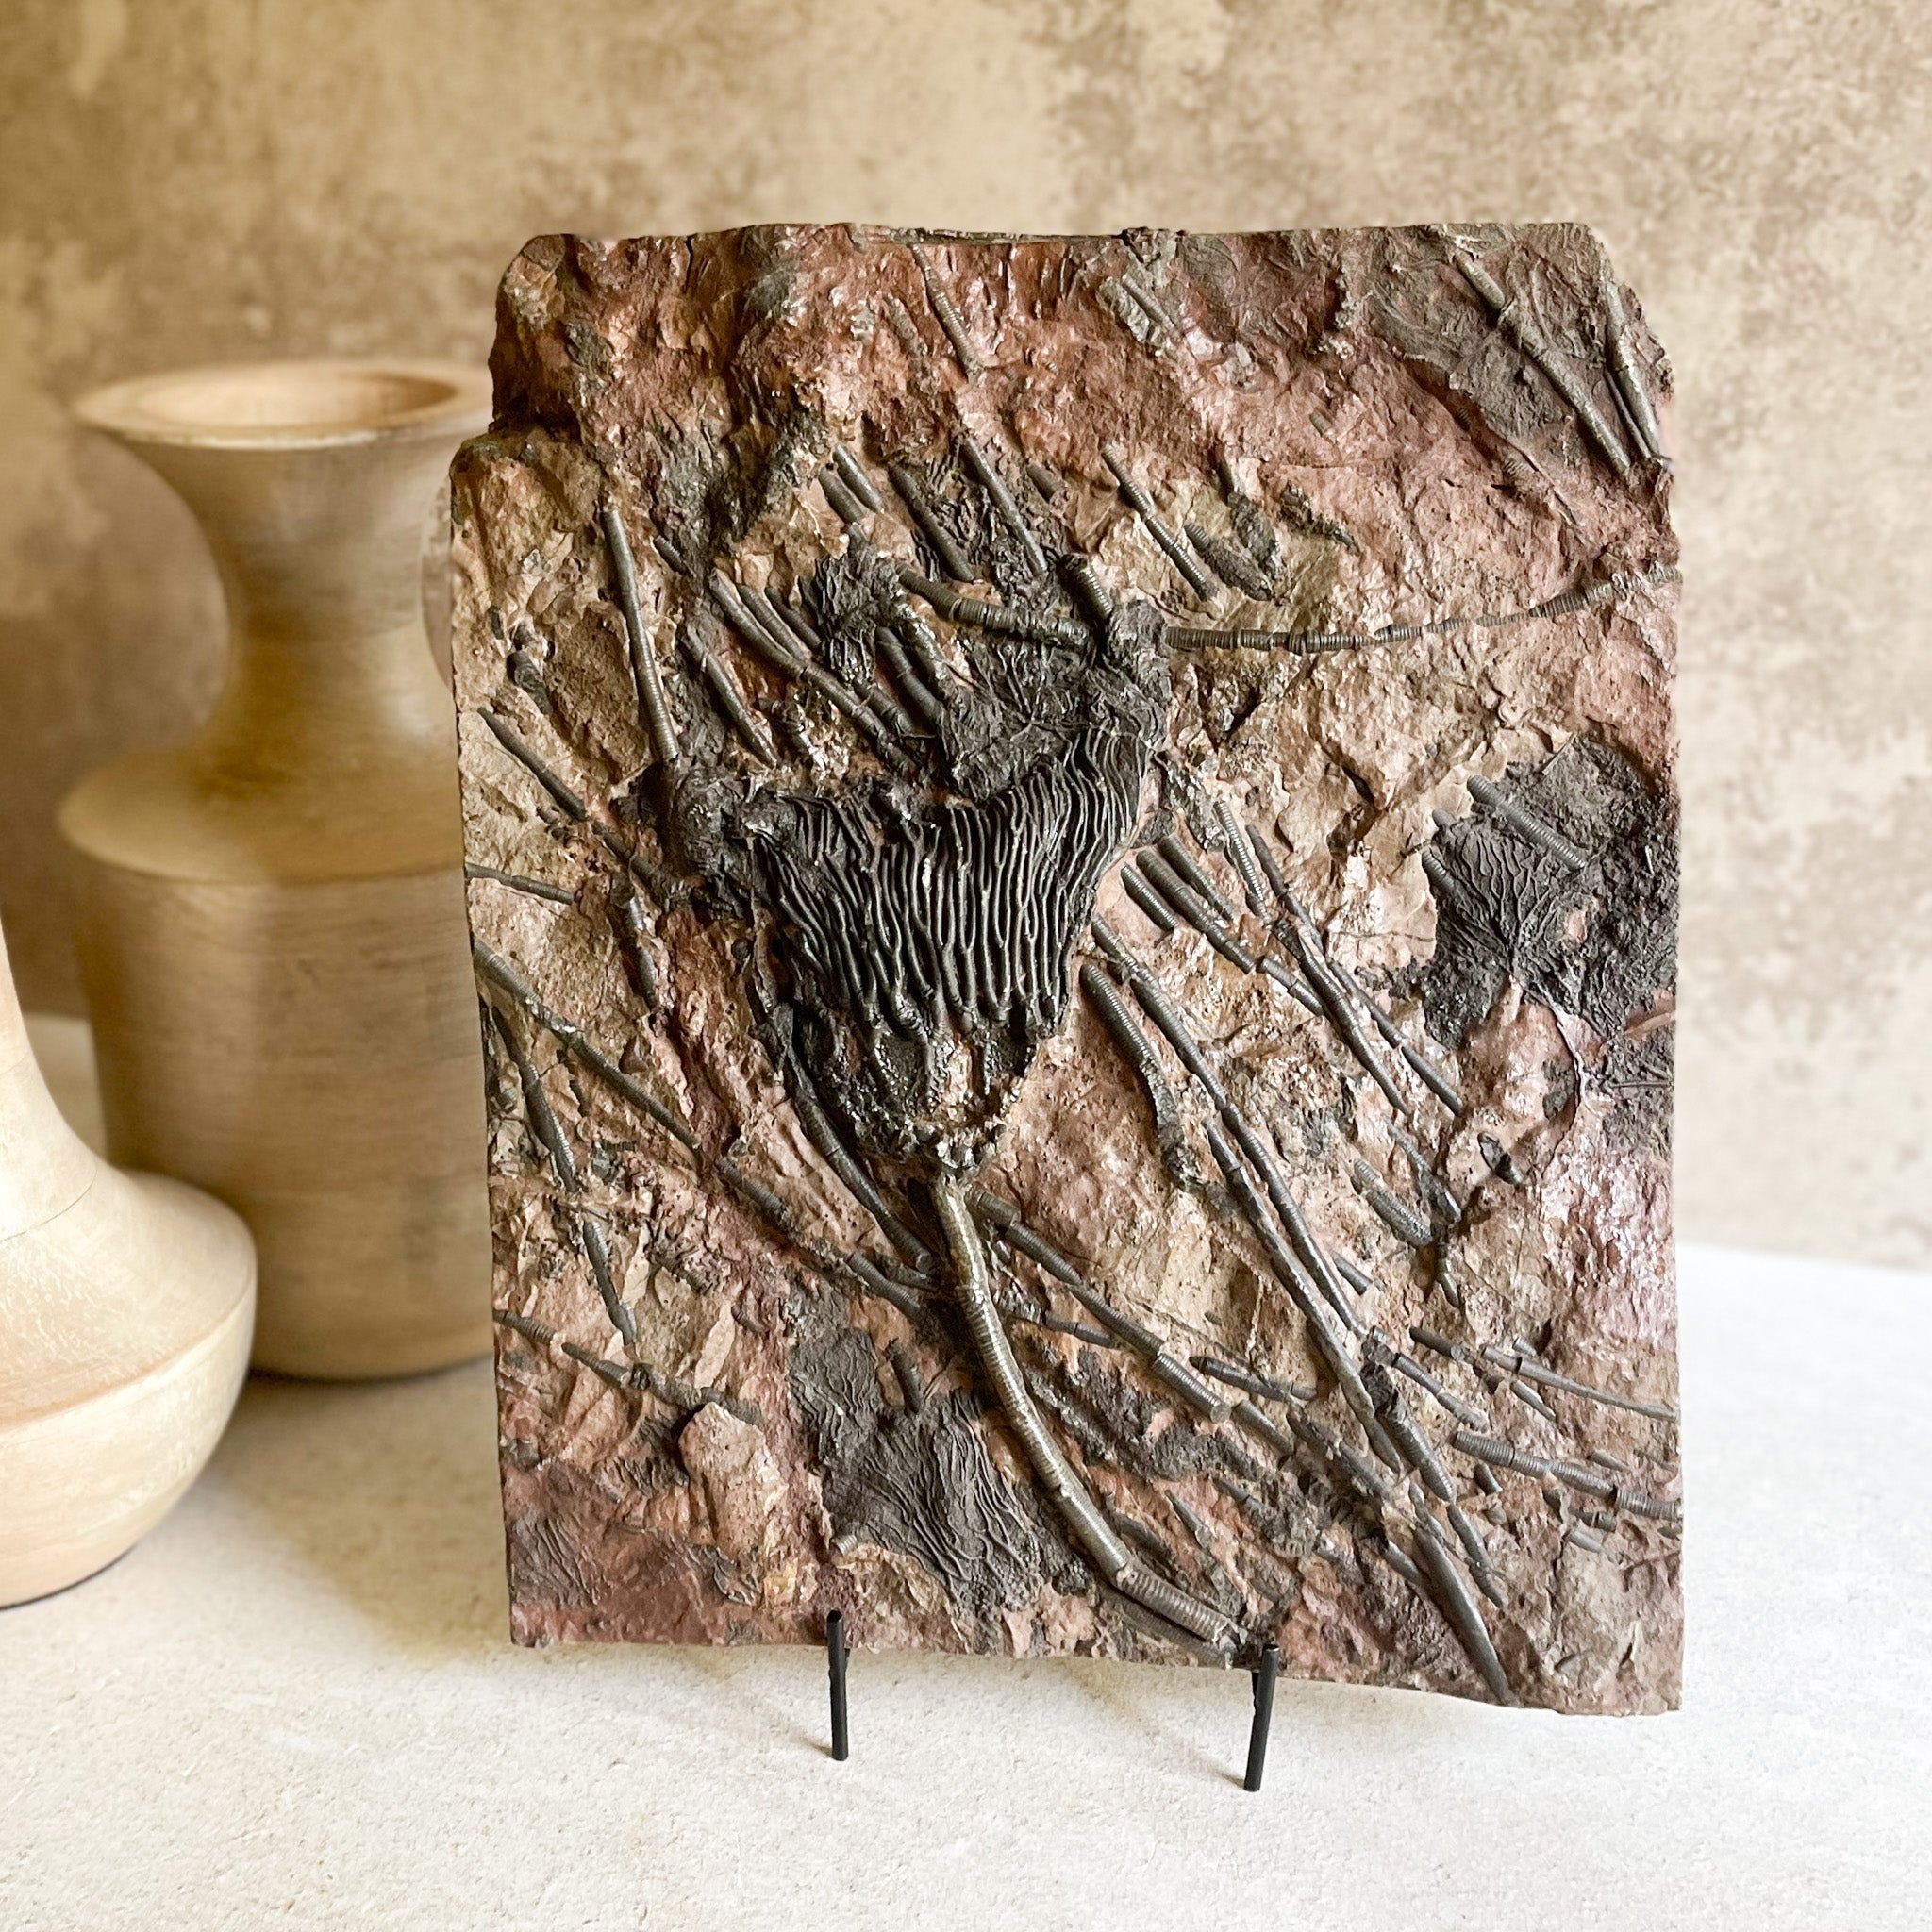 Fossil Crinoid Plaque, Fossil Lover Gift, Fossil Decor